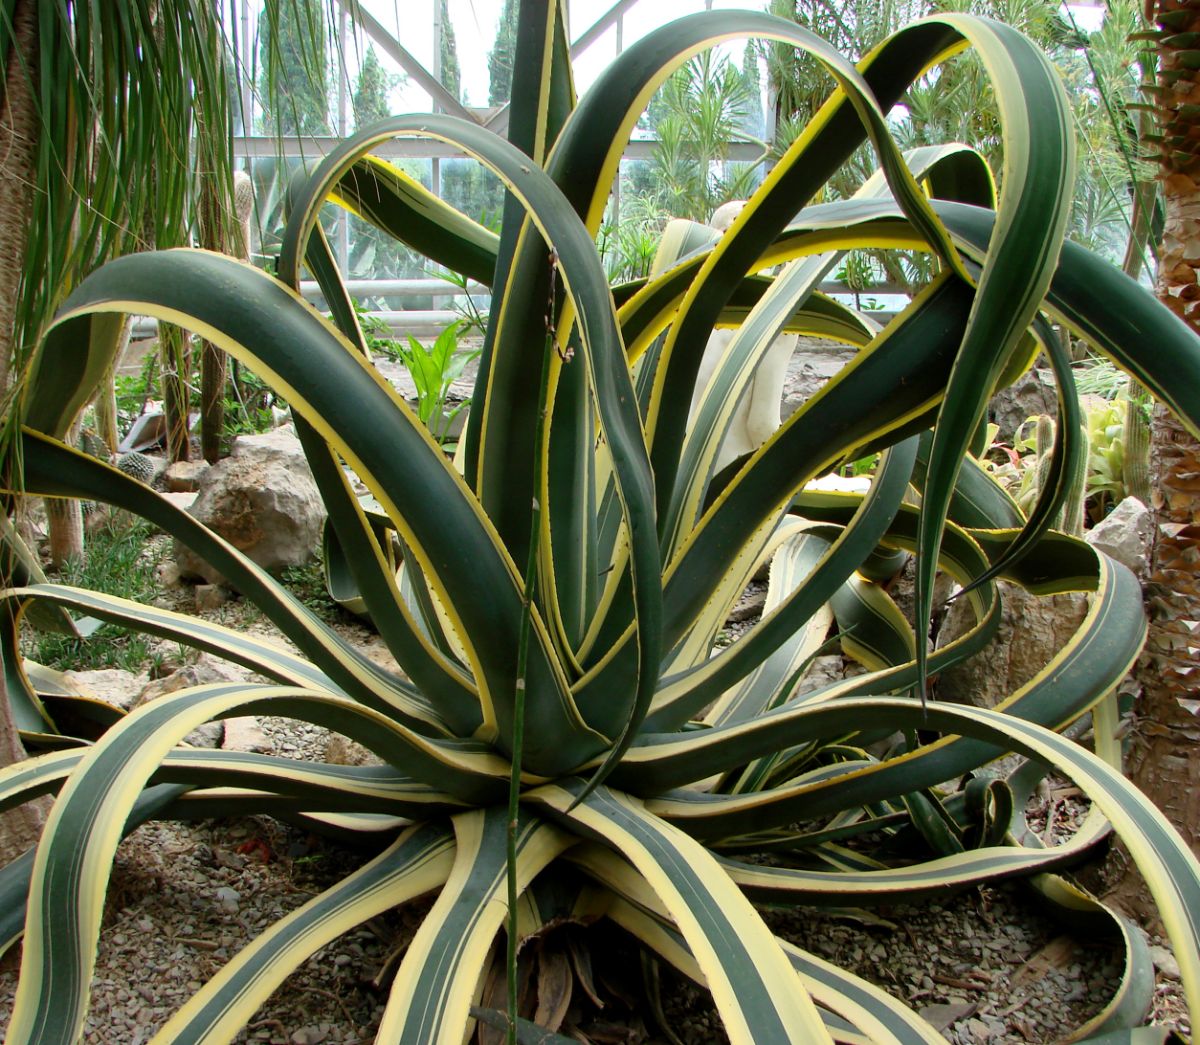 A beautiful Agave desmettiana with golden-yellow leaves.